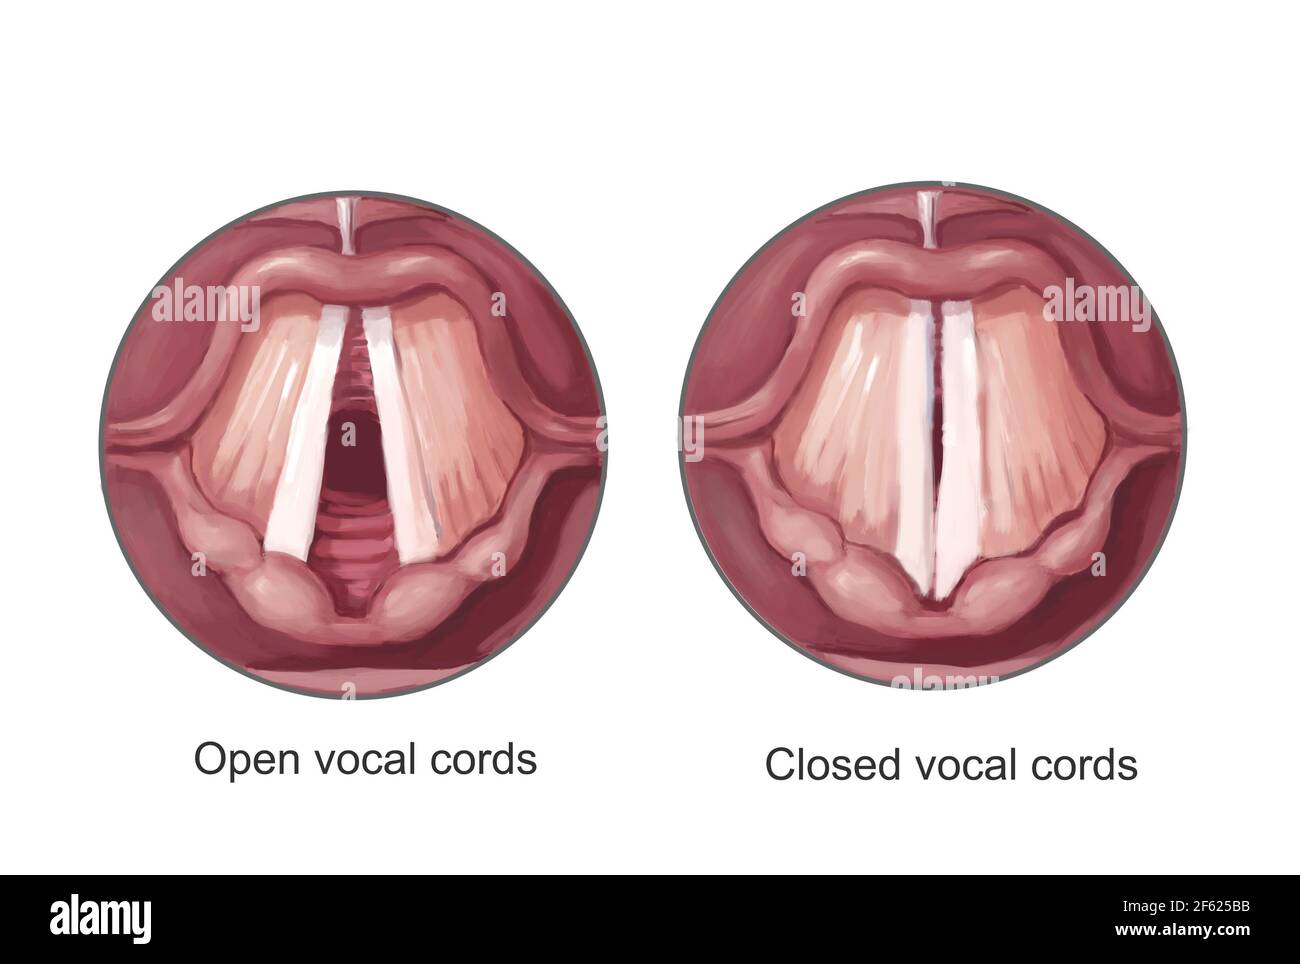 Open and Closed Vocal Chords, Illustration Stock Photo